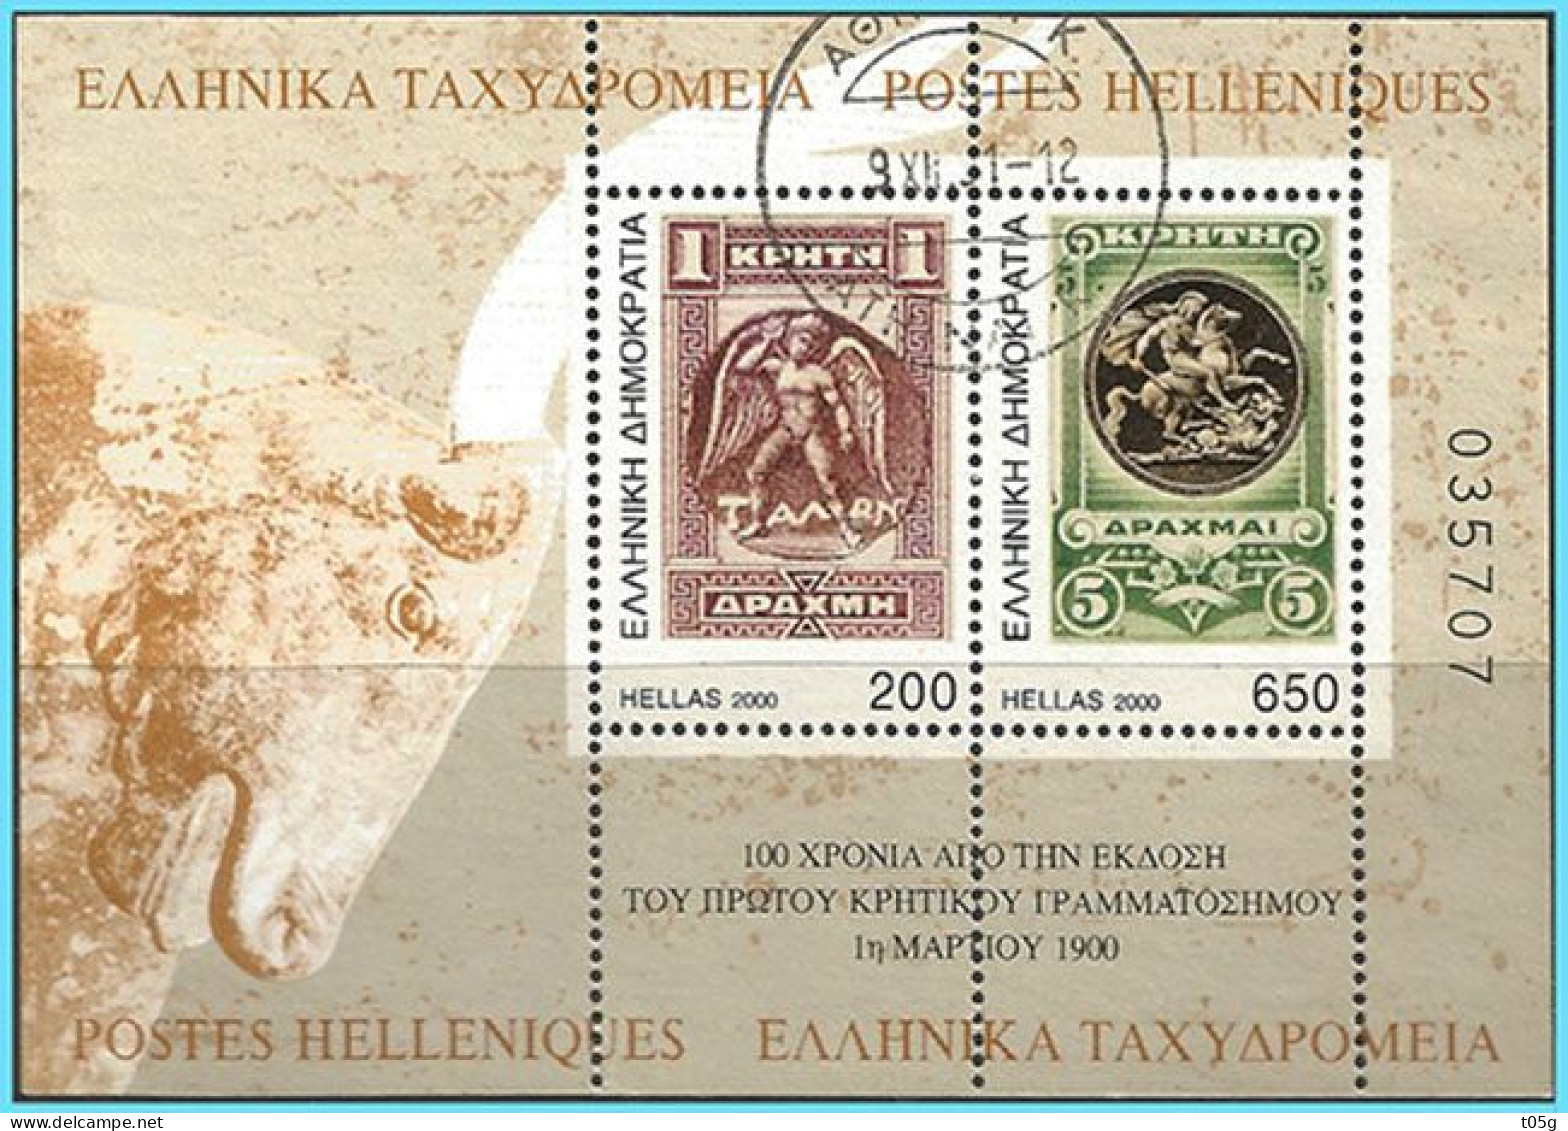 GREECE- GRECE- HELLAS 2000:  The Stamps Of Crete Miniature Sheet Used - Used Stamps